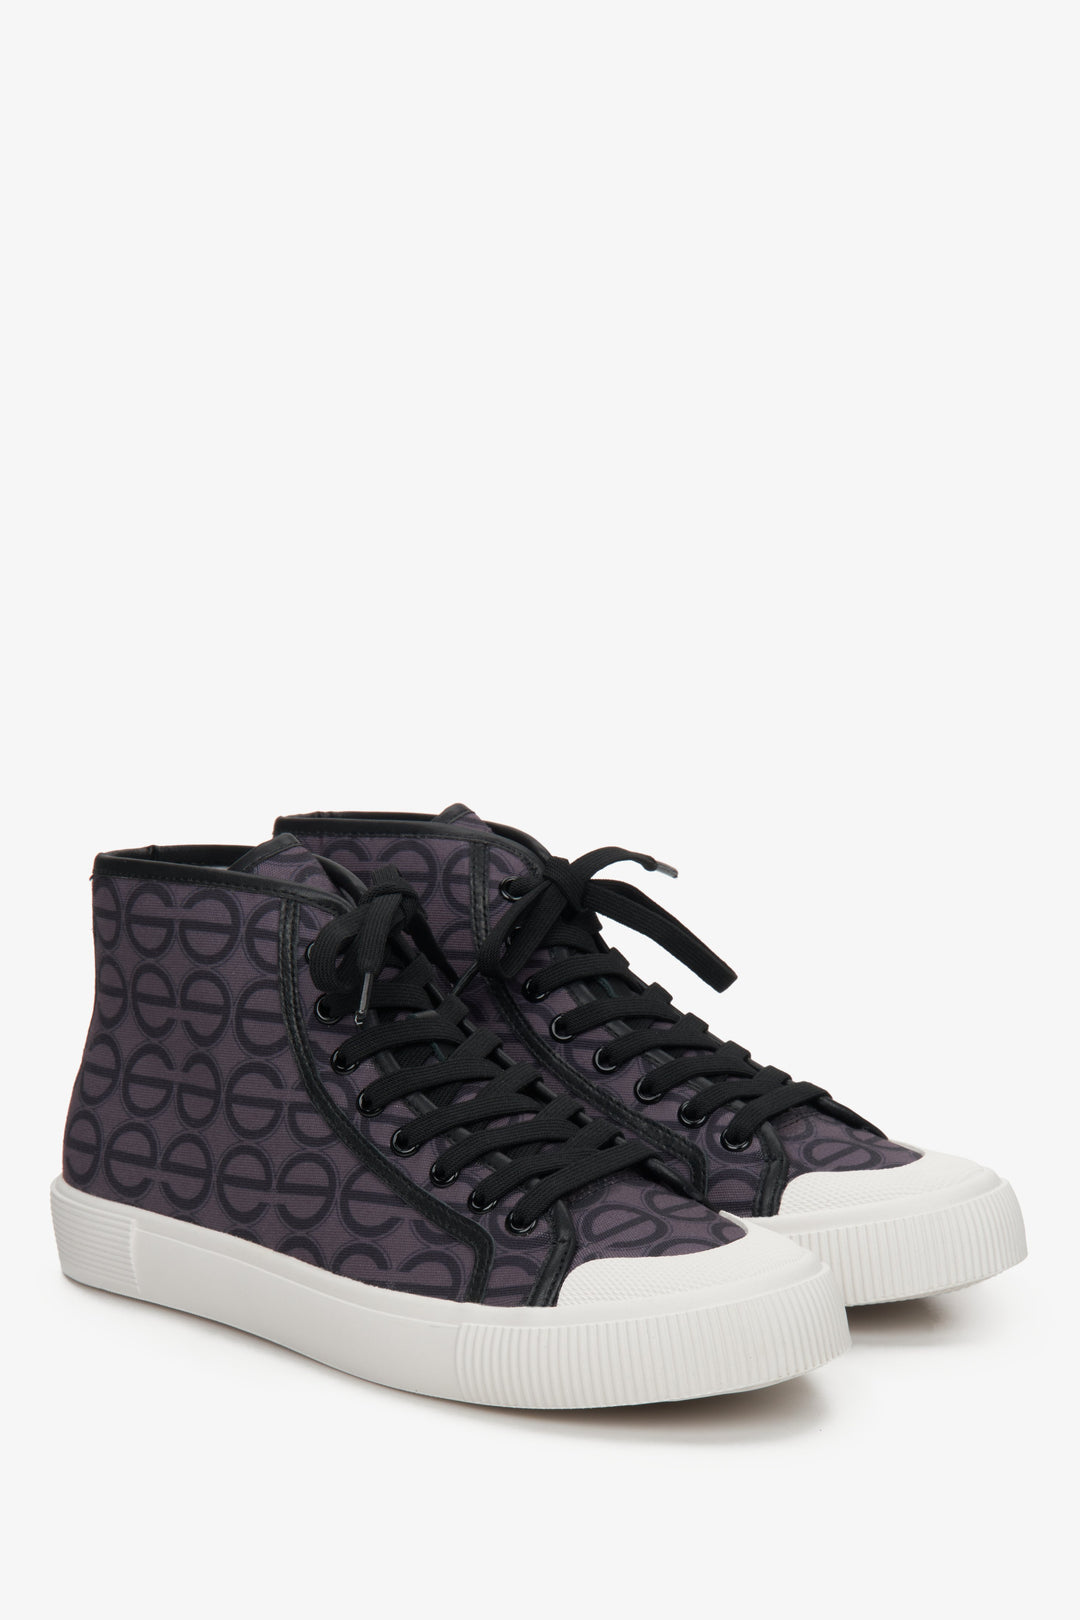 Women's high top textile sneakers by Estro, laced, in black and purple.